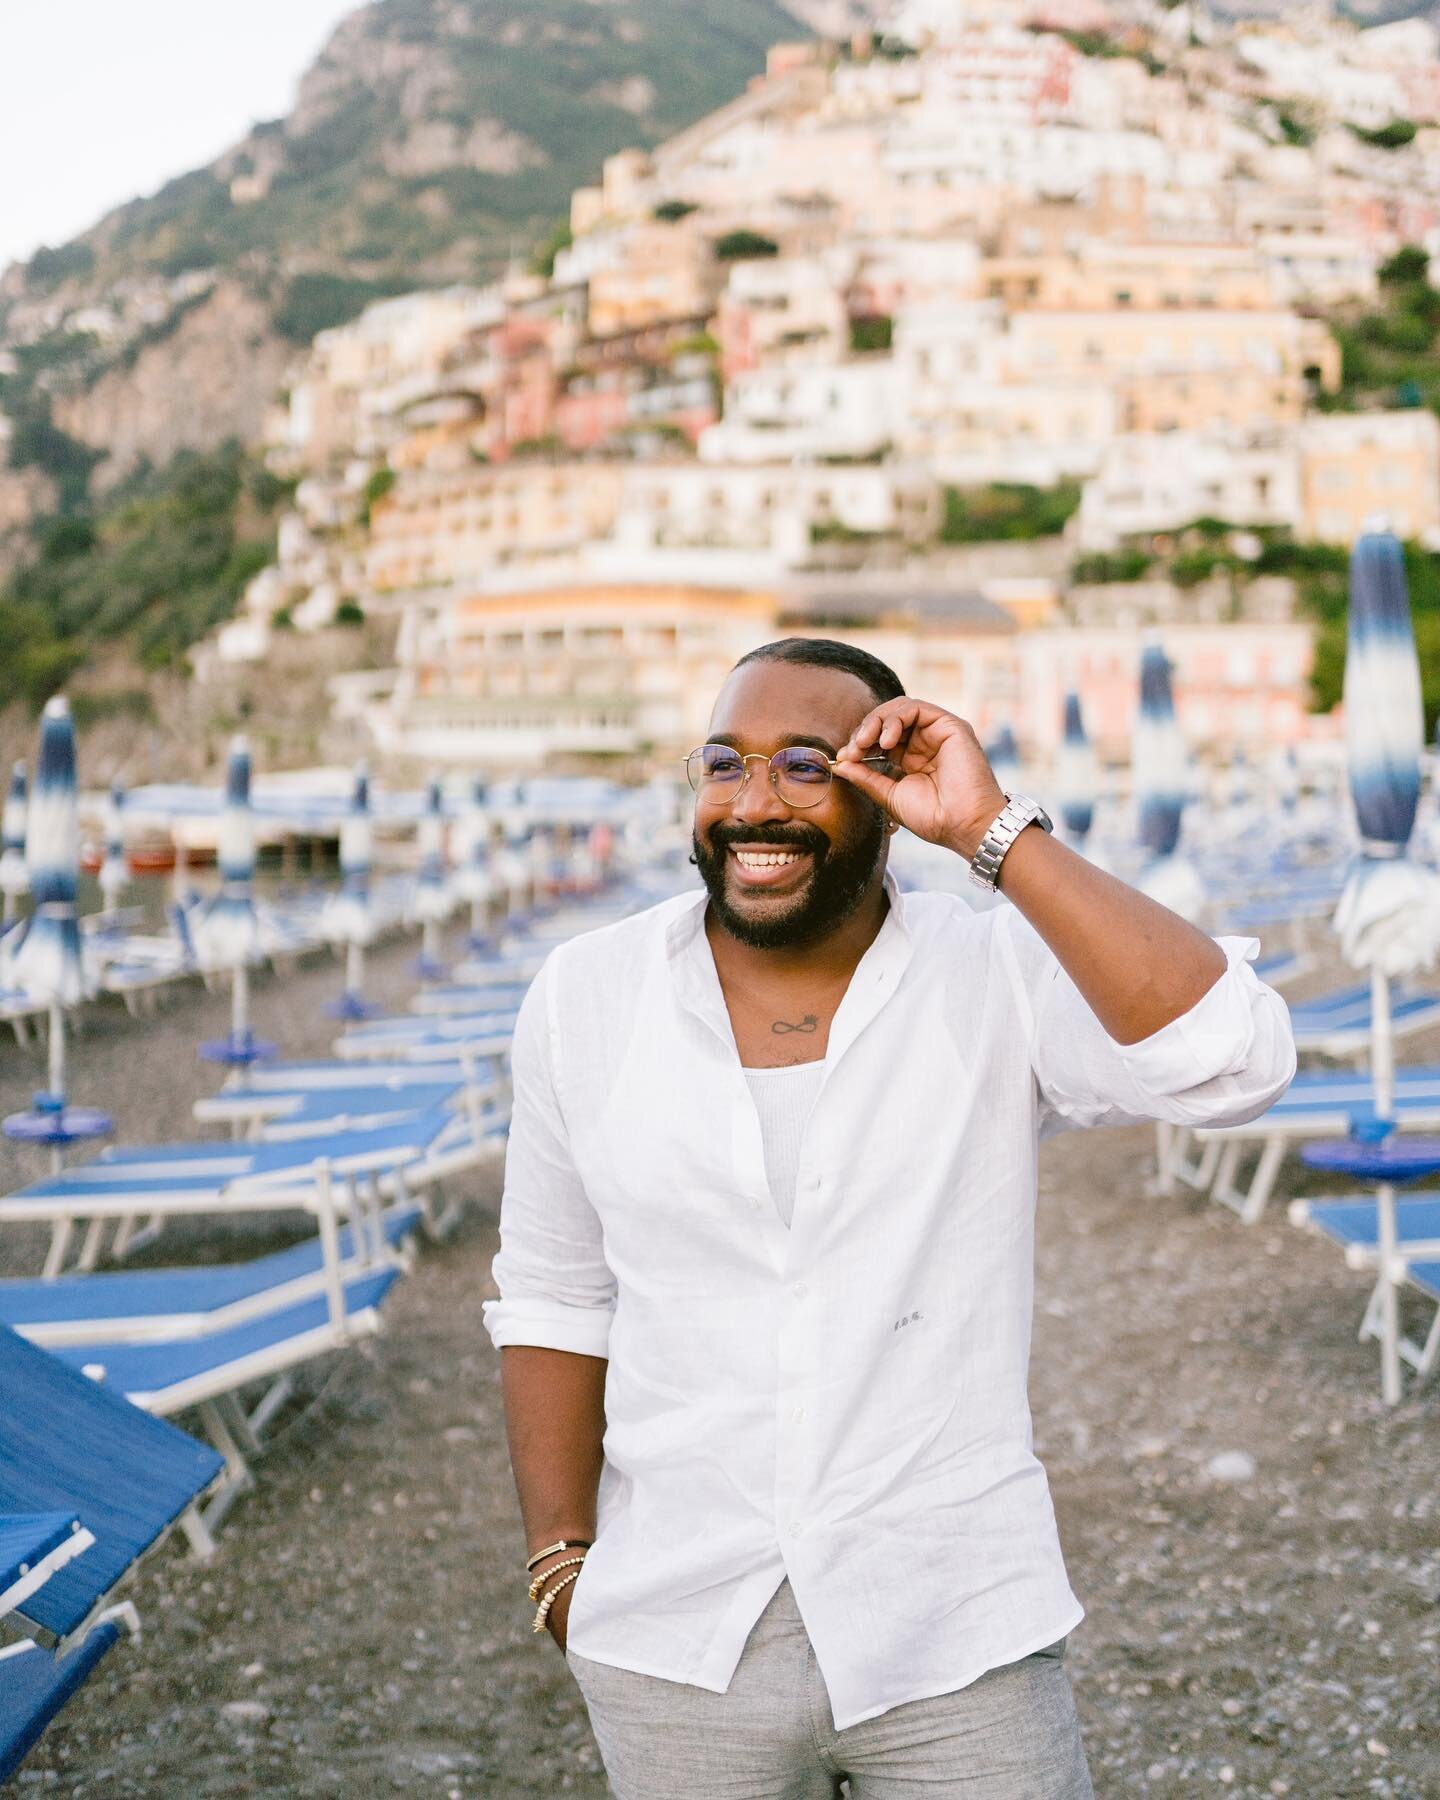 I can show you better than I can tell you 🌐
.
.
.
📸 @agallucci_photo #BIY #Believeinyourself #GardnerGlobal #letsbuildwealth #positano #photoshoot #outhere #globetrotter #couldofbeenhere